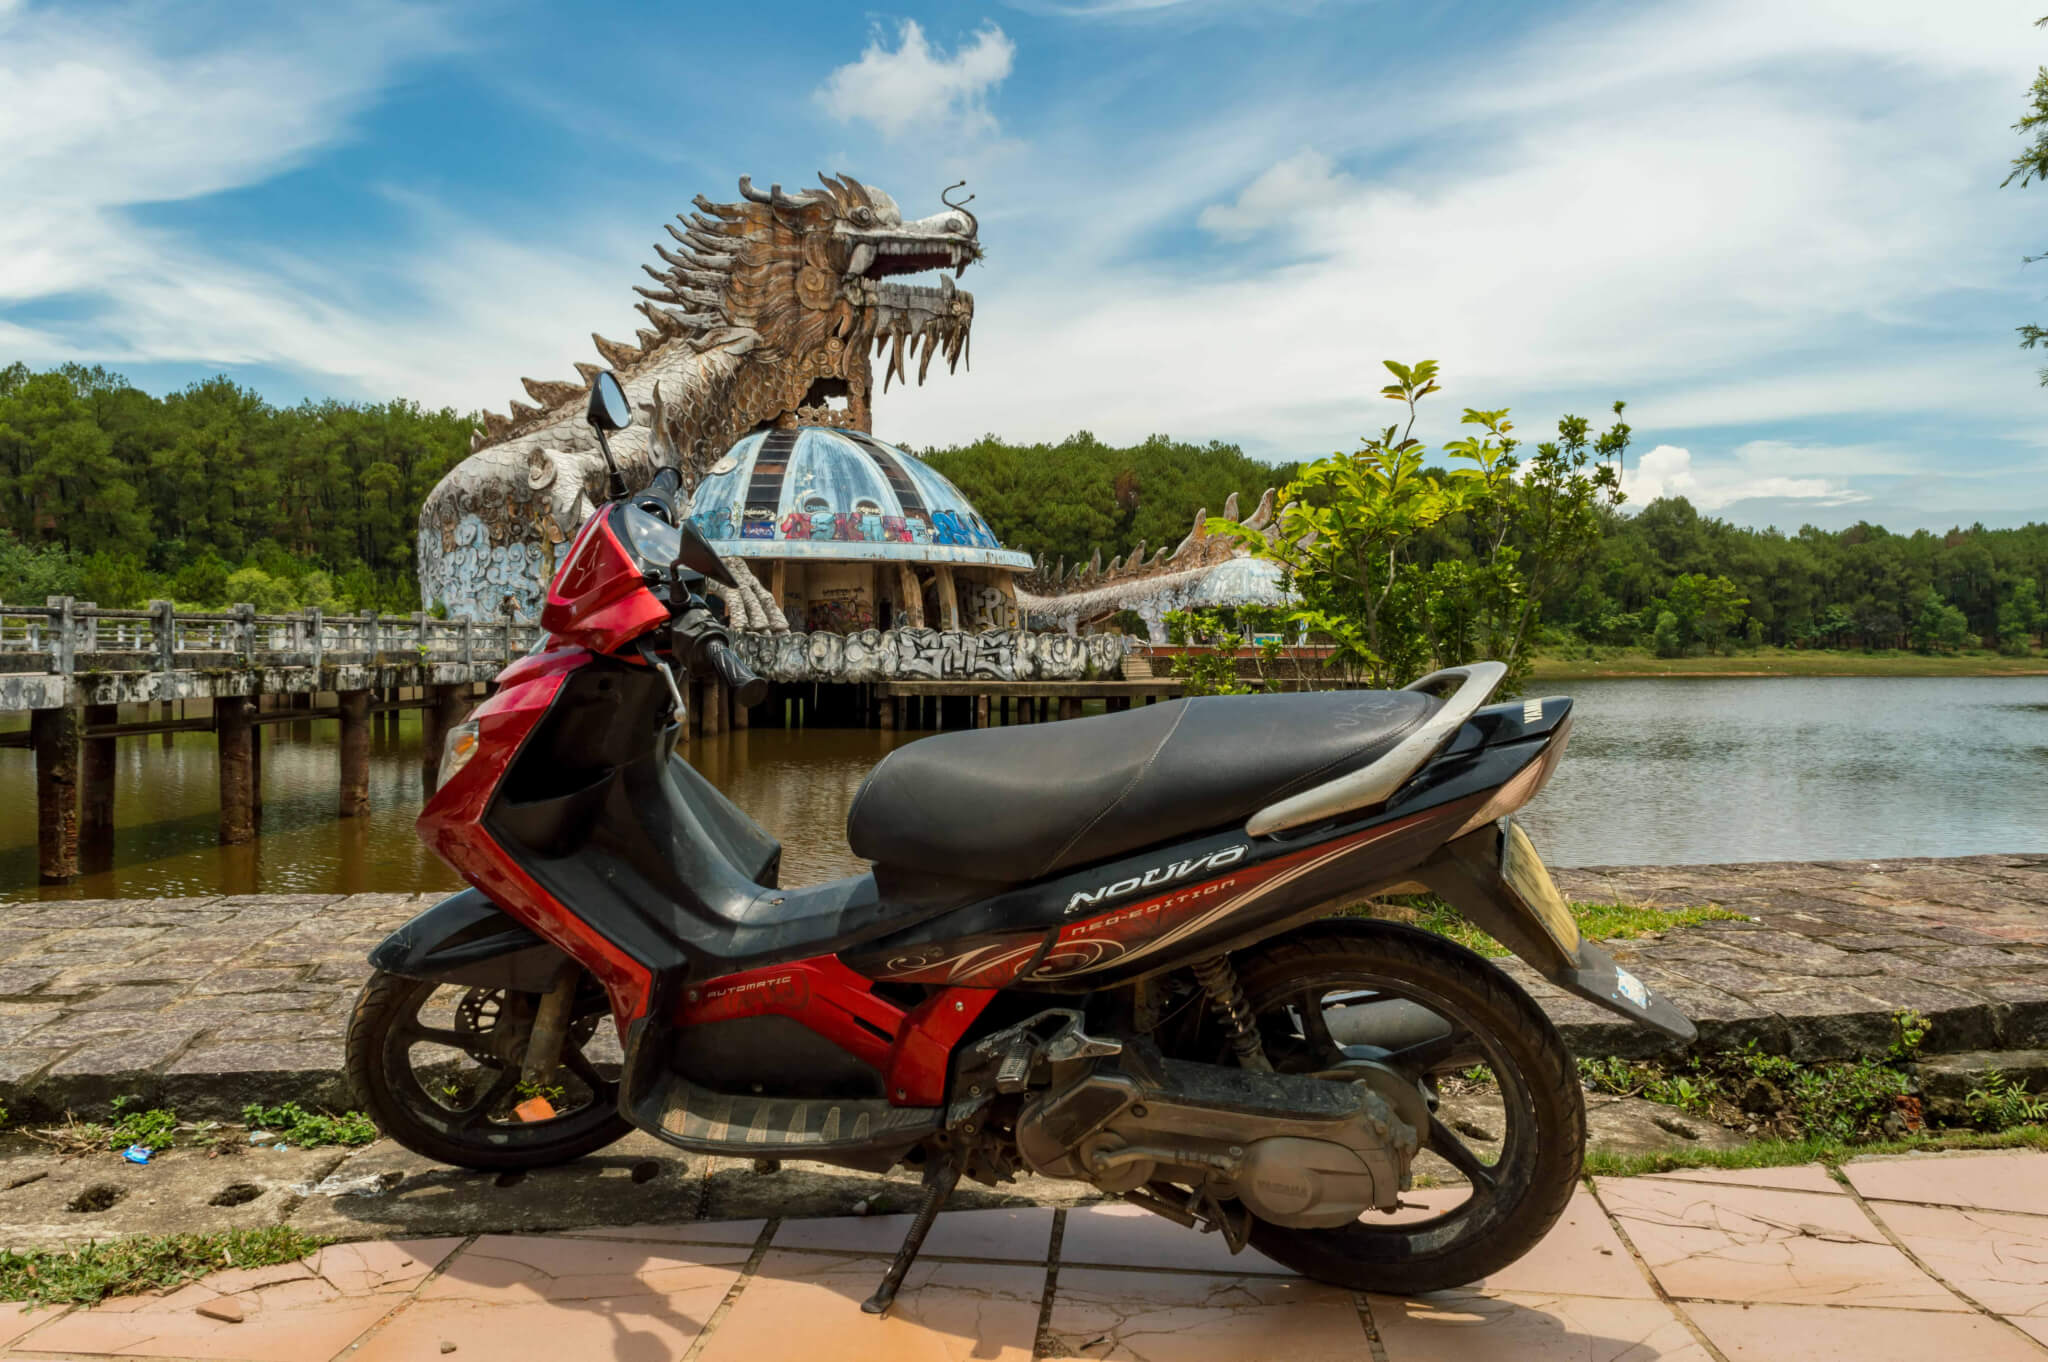 Ho Thuy Tien, an abandoned water park outside Hue, is a unique attraction in central Vietnam